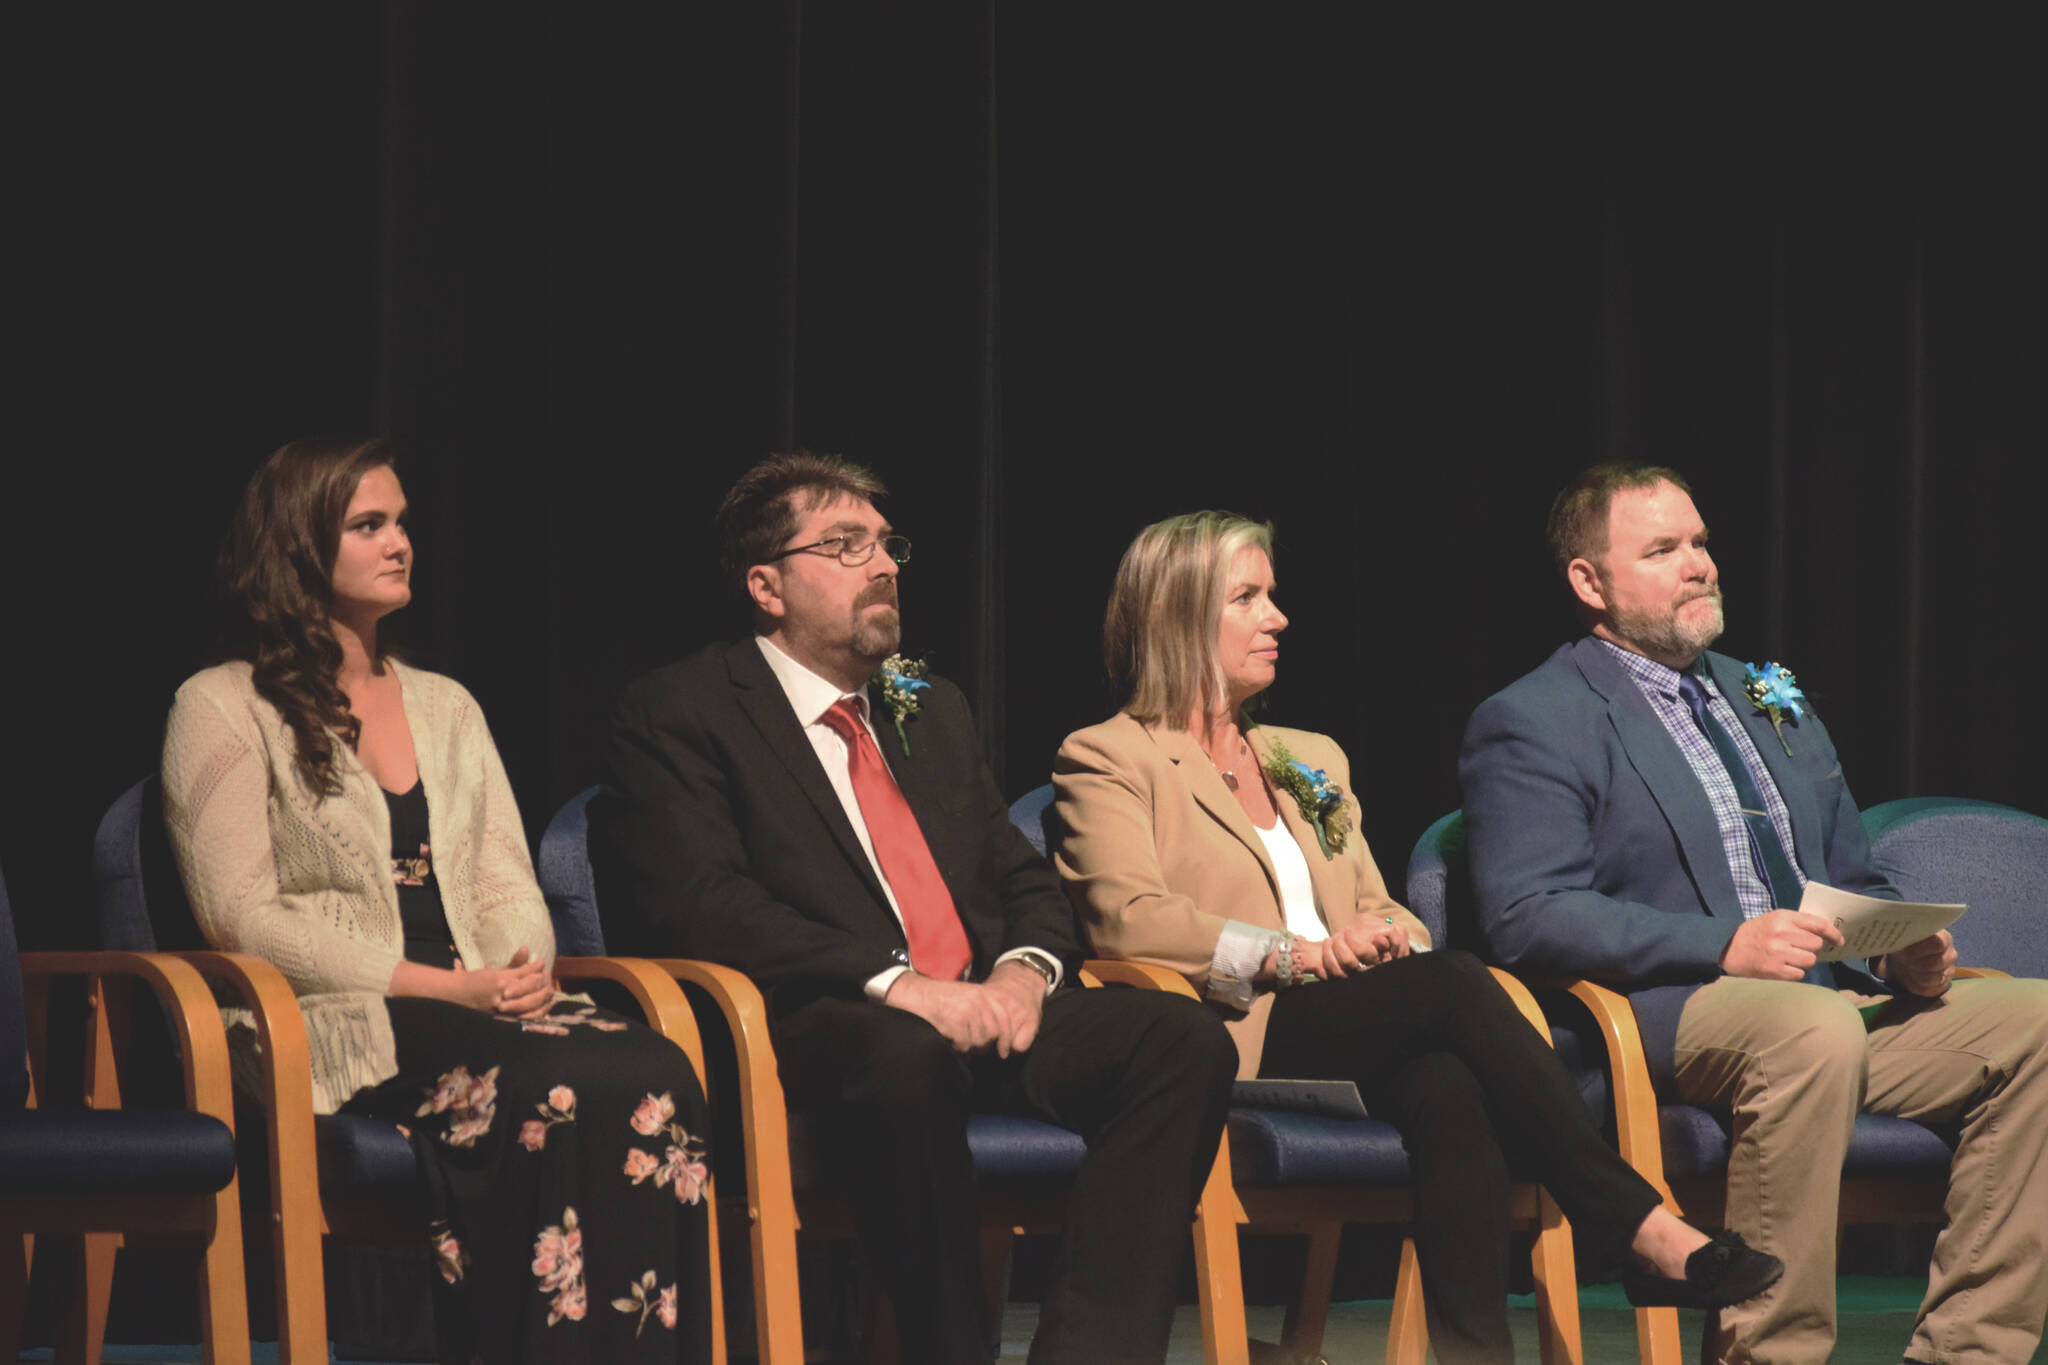 Special guests including Kenai Peninsula Borough School District Superintendent Clayton Holland, far right, attend Connections Homeschool’s commencement ceremony on Thursday, May 19, 2022, in Soldotna, Alaska. (Ashlyn O’Hara/Peninsula Clarion)